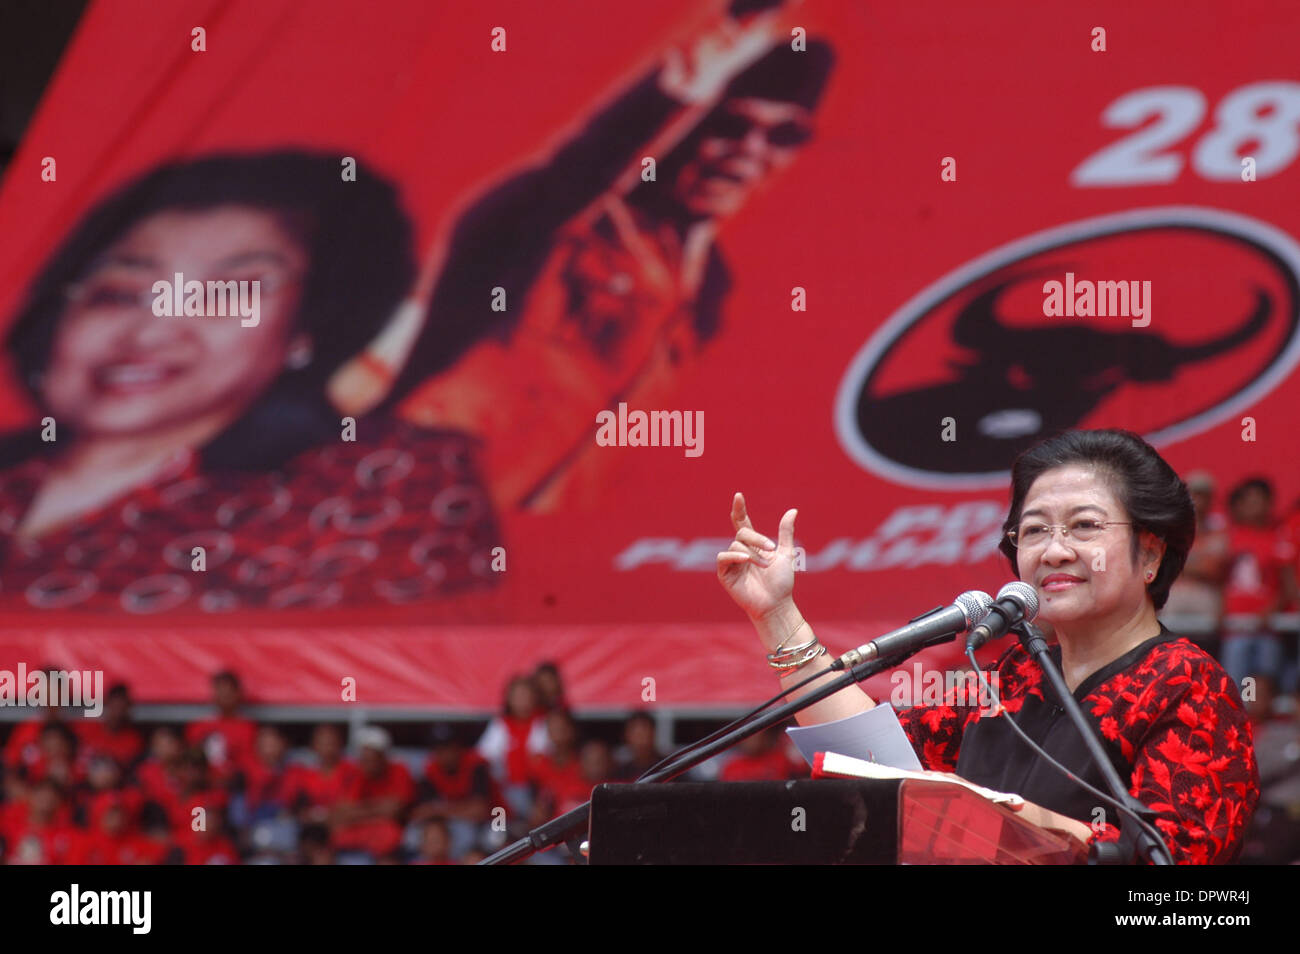 Apr 05, 2009 - Jakarta, Indonesia - Former president and the leader of the Indonesian Democratic Party in Struggle (PDI Perjuangan), MEGAWATI SUKARNO PUTRI gestures during the campaign in Jakarta, Indonesia, April 4, 2009. Legislative elections for the 128 seats of the Regional Representatives Council and the 560 seats of the People's Representative Council will be held in Indonesi Stock Photo